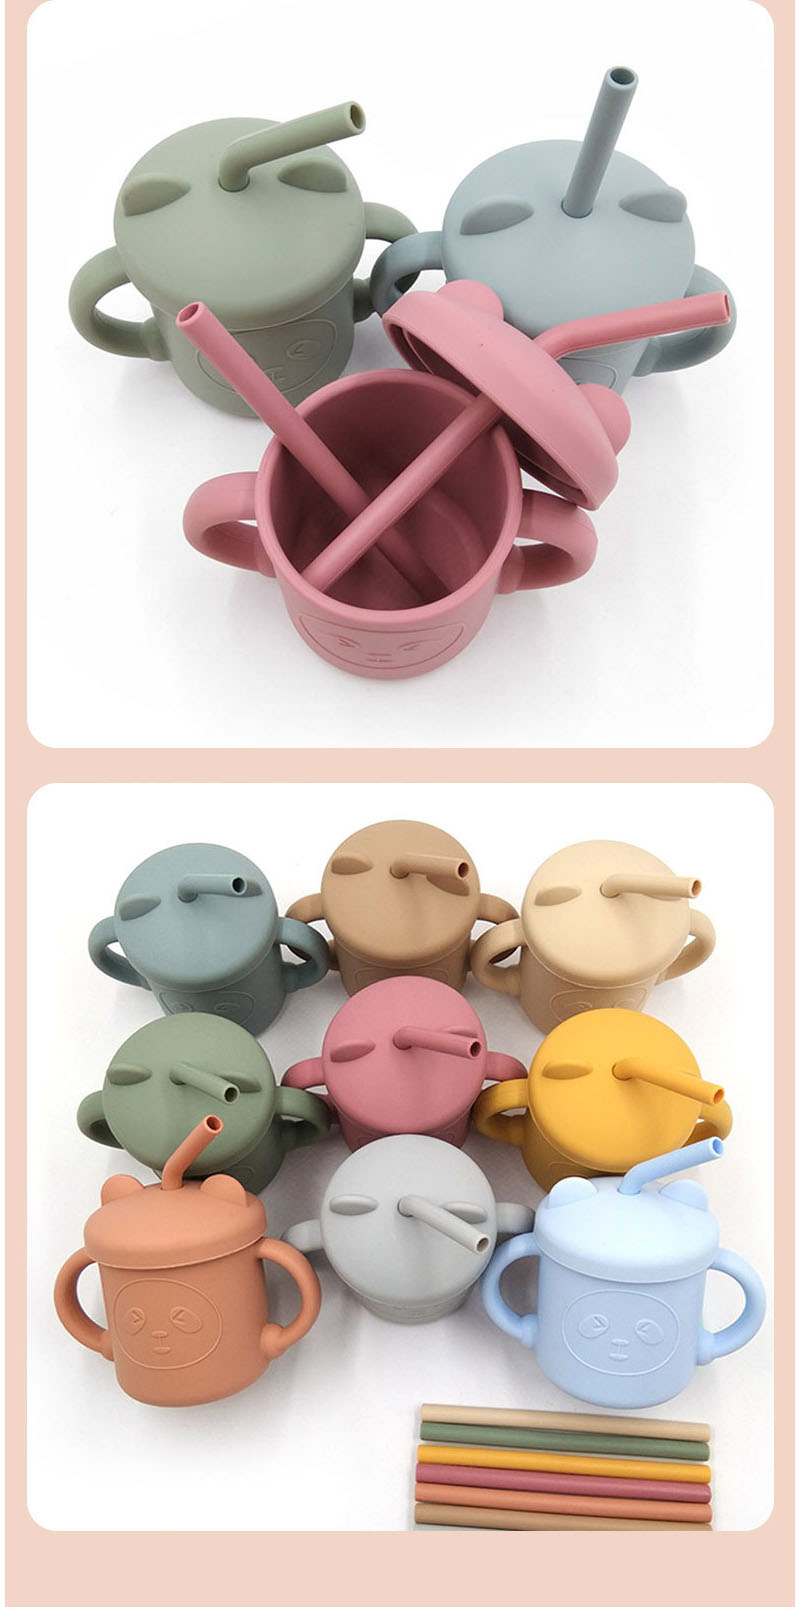 Folding Baby Training Silicone Drinking Water Cup